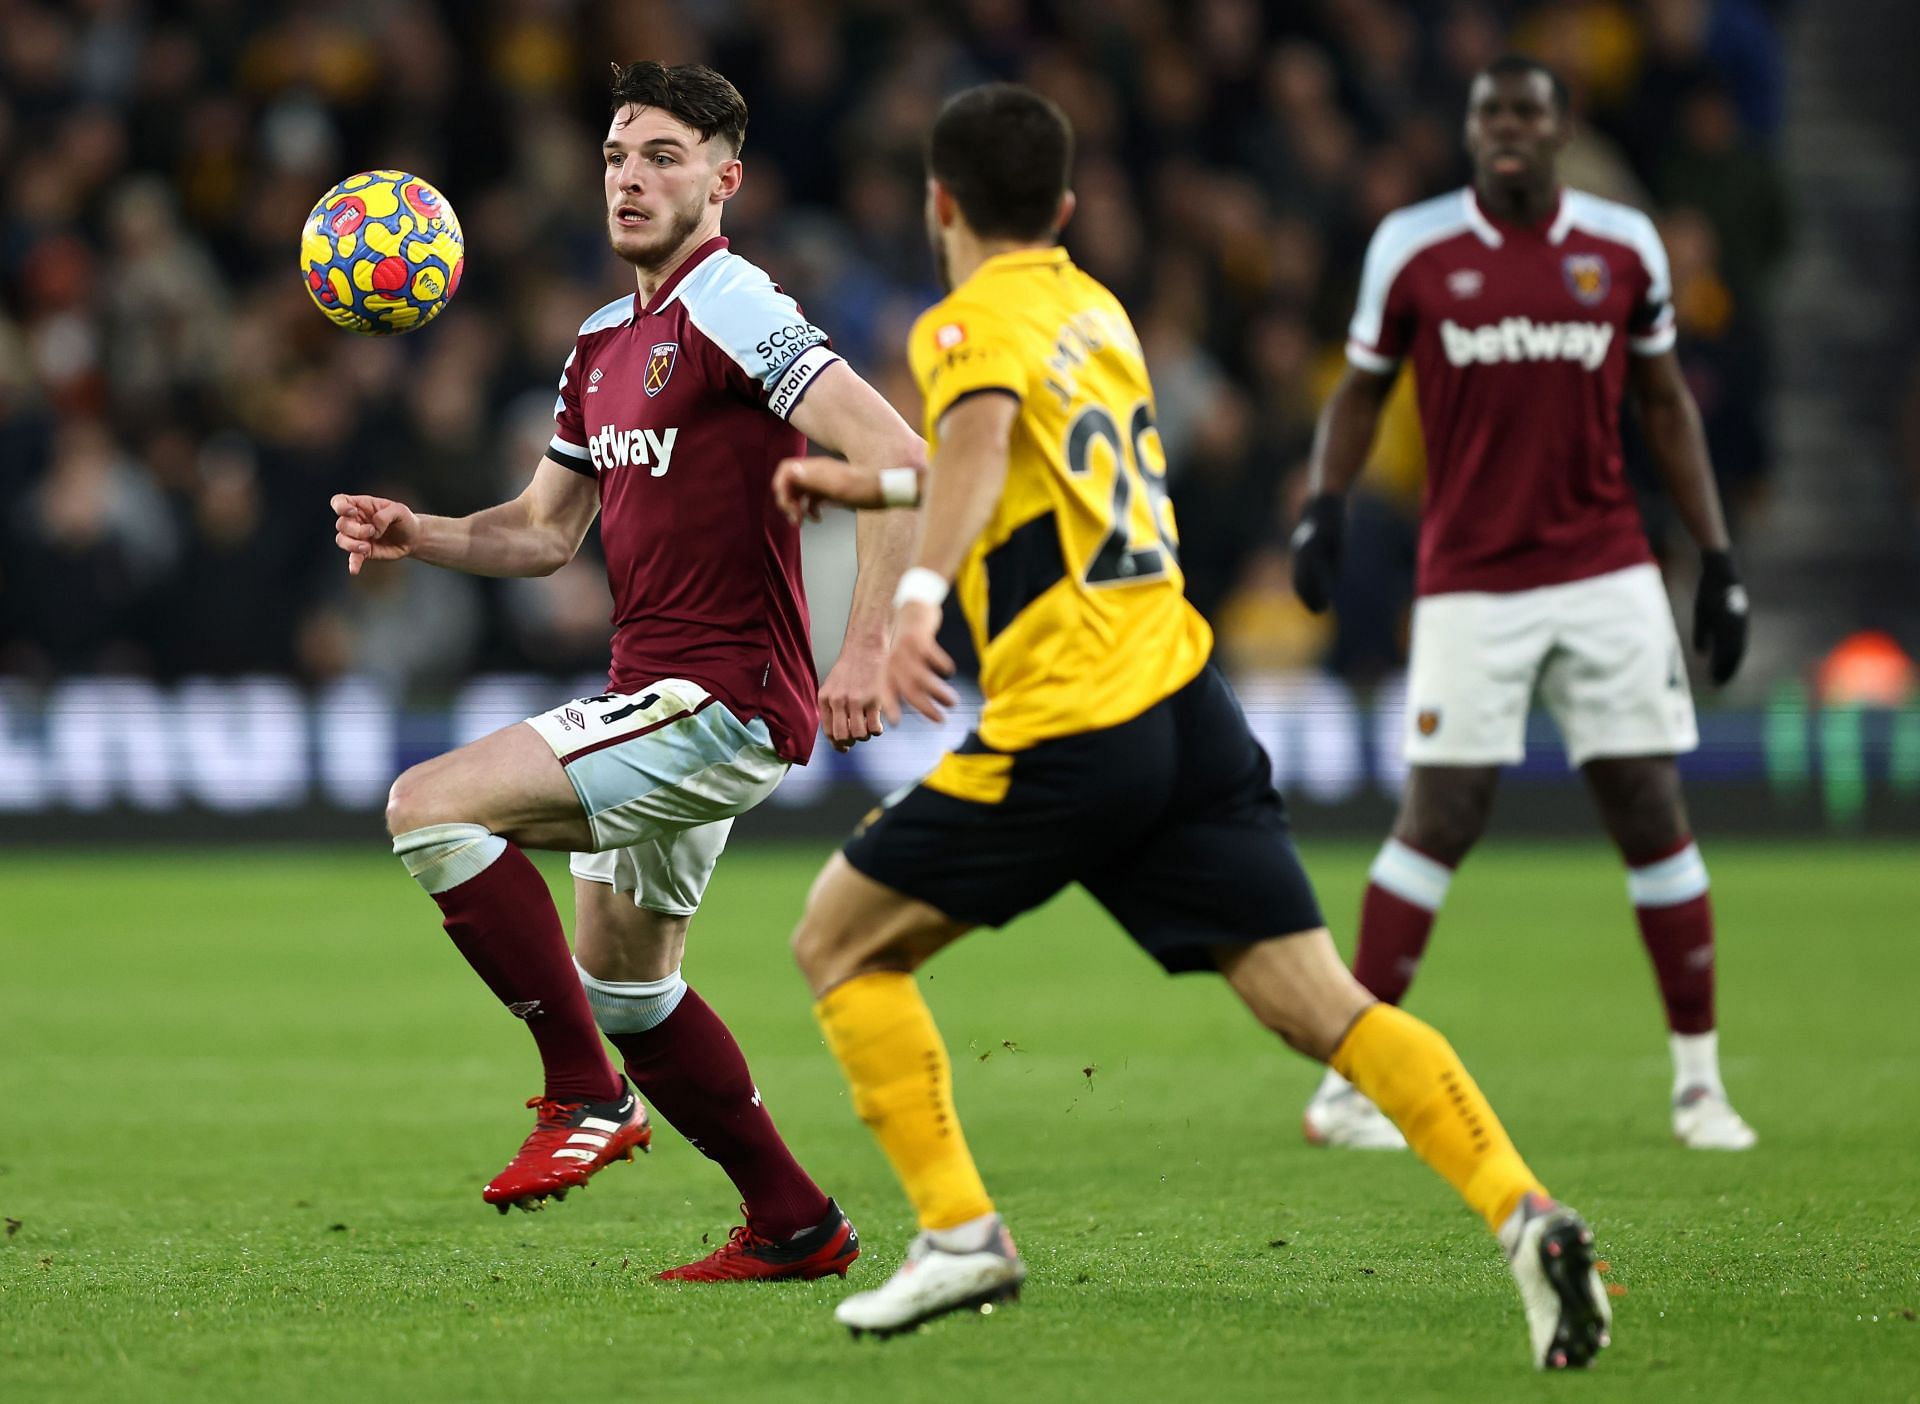 West Ham United host Wolverhampton Wanderers in their upcoming Premier League fixture on Sunday